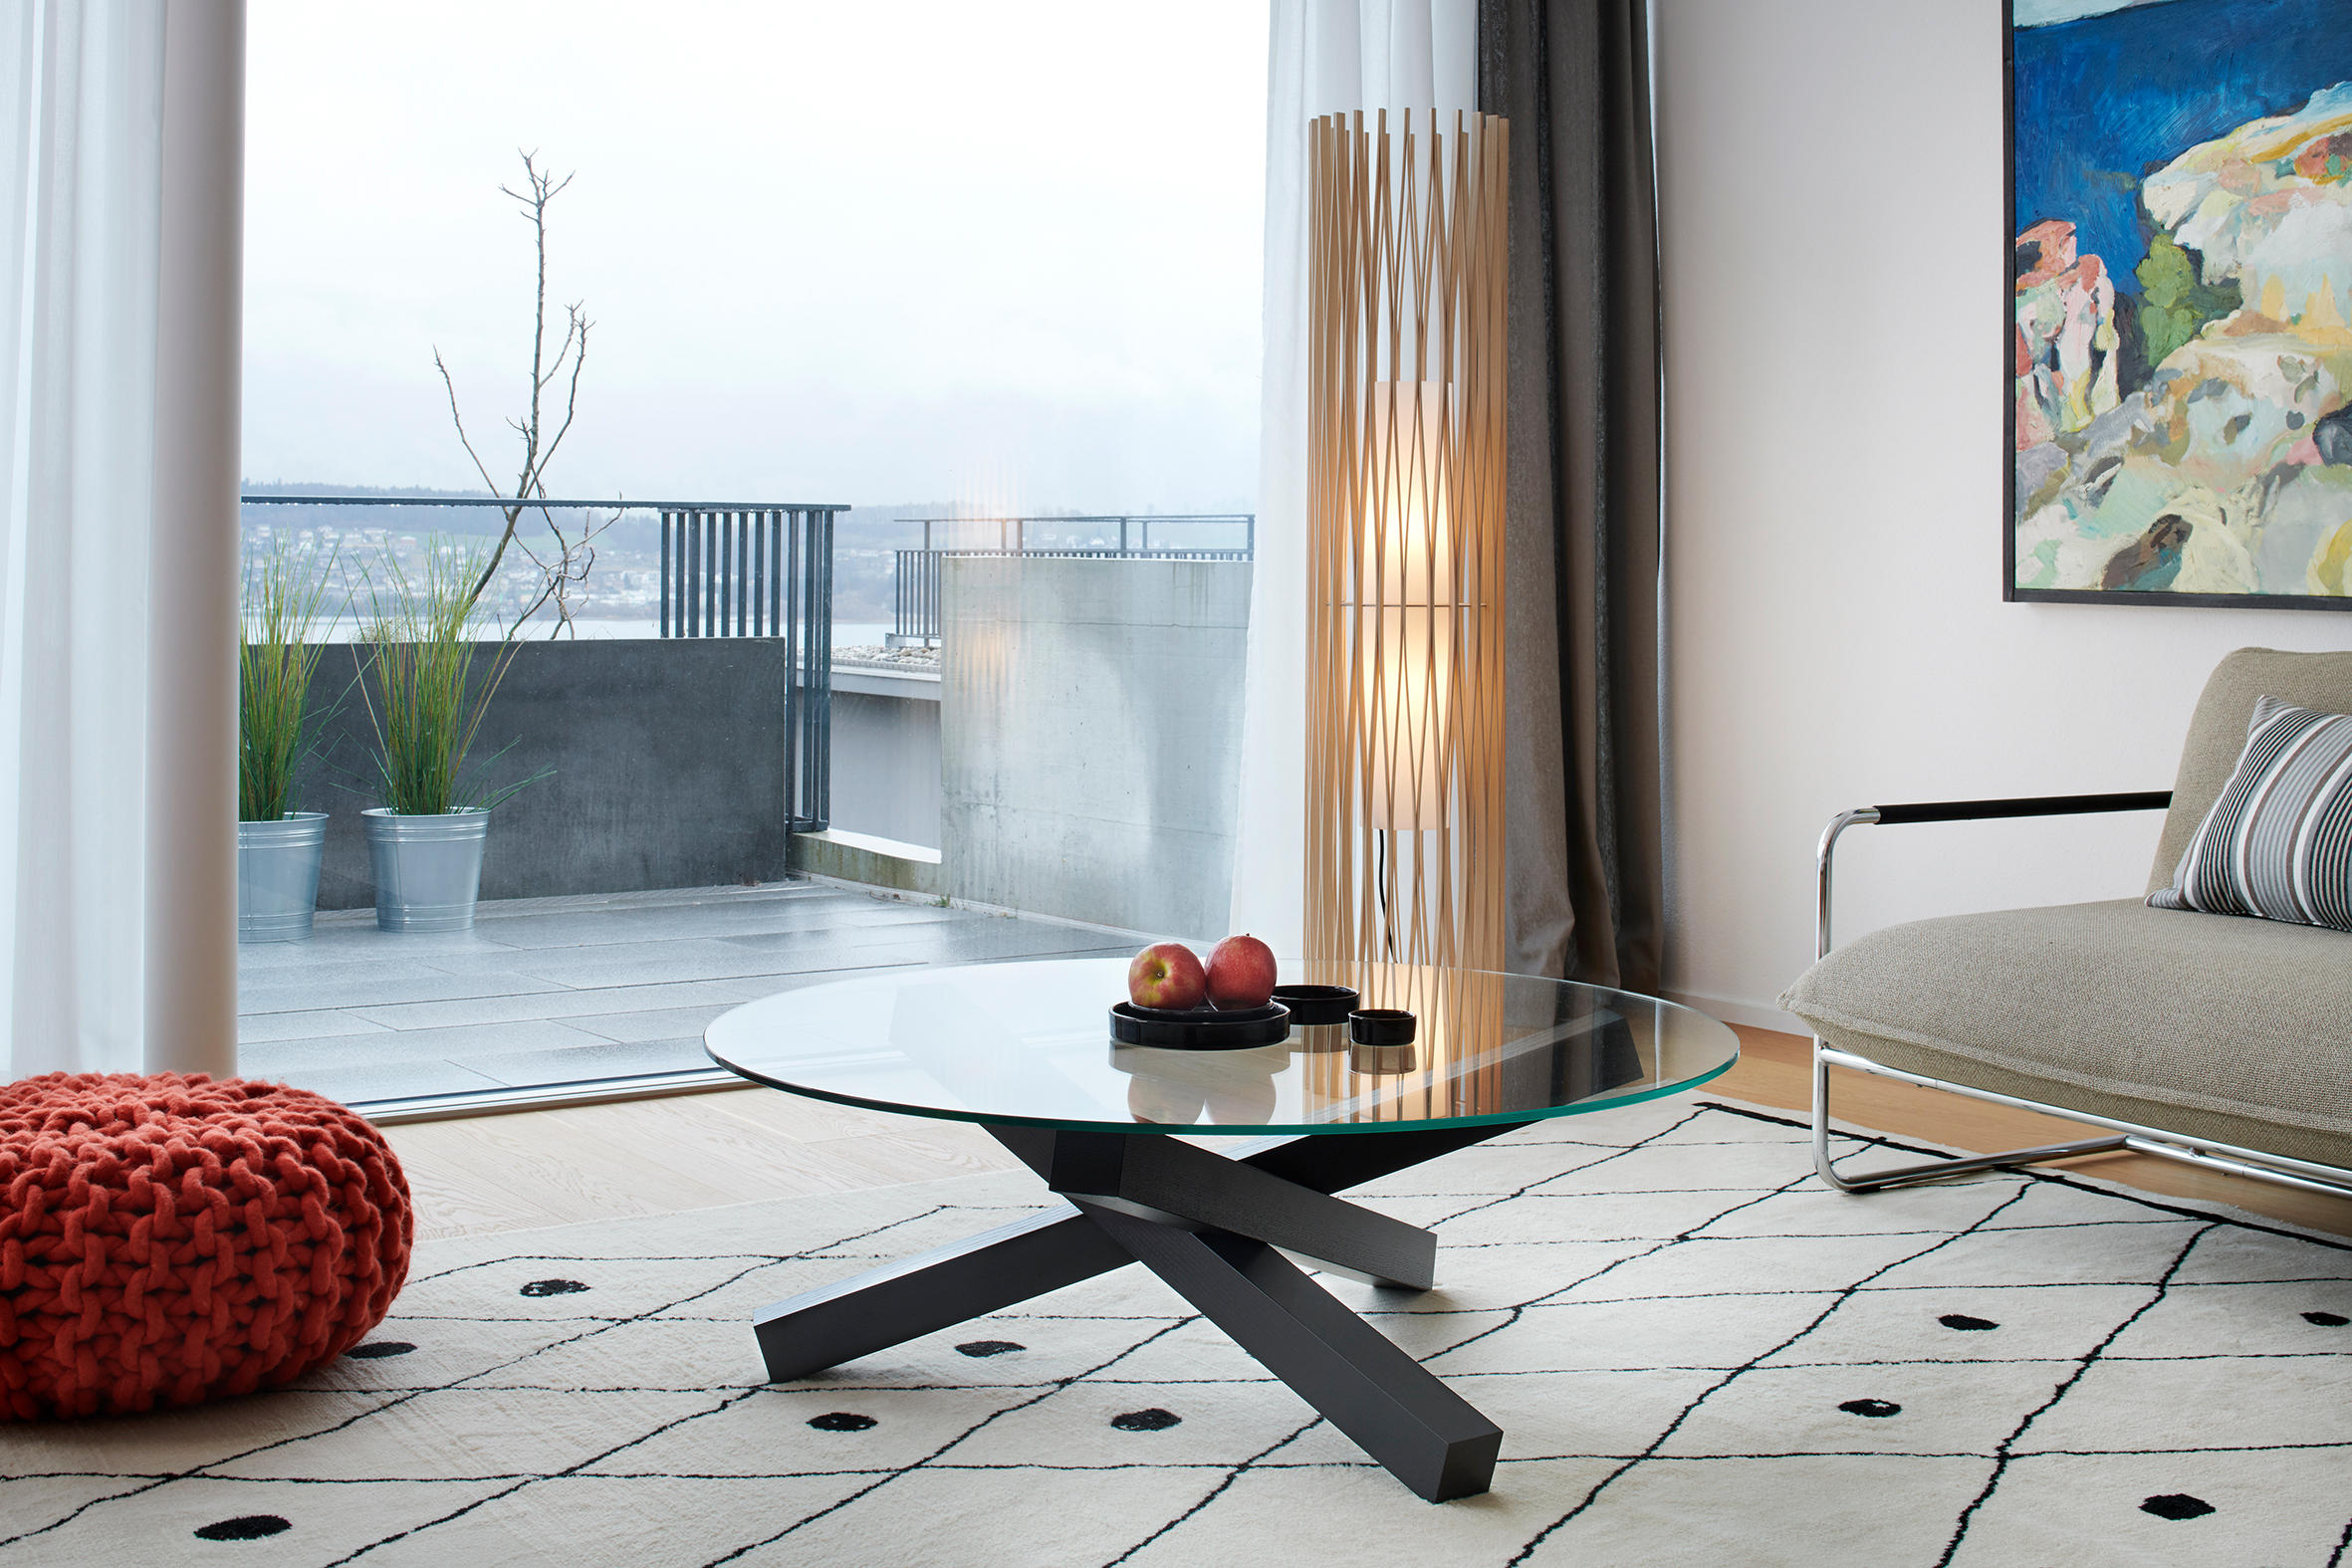 Campfire Coffee Tables From Rthlisberger Kollektion Architonic